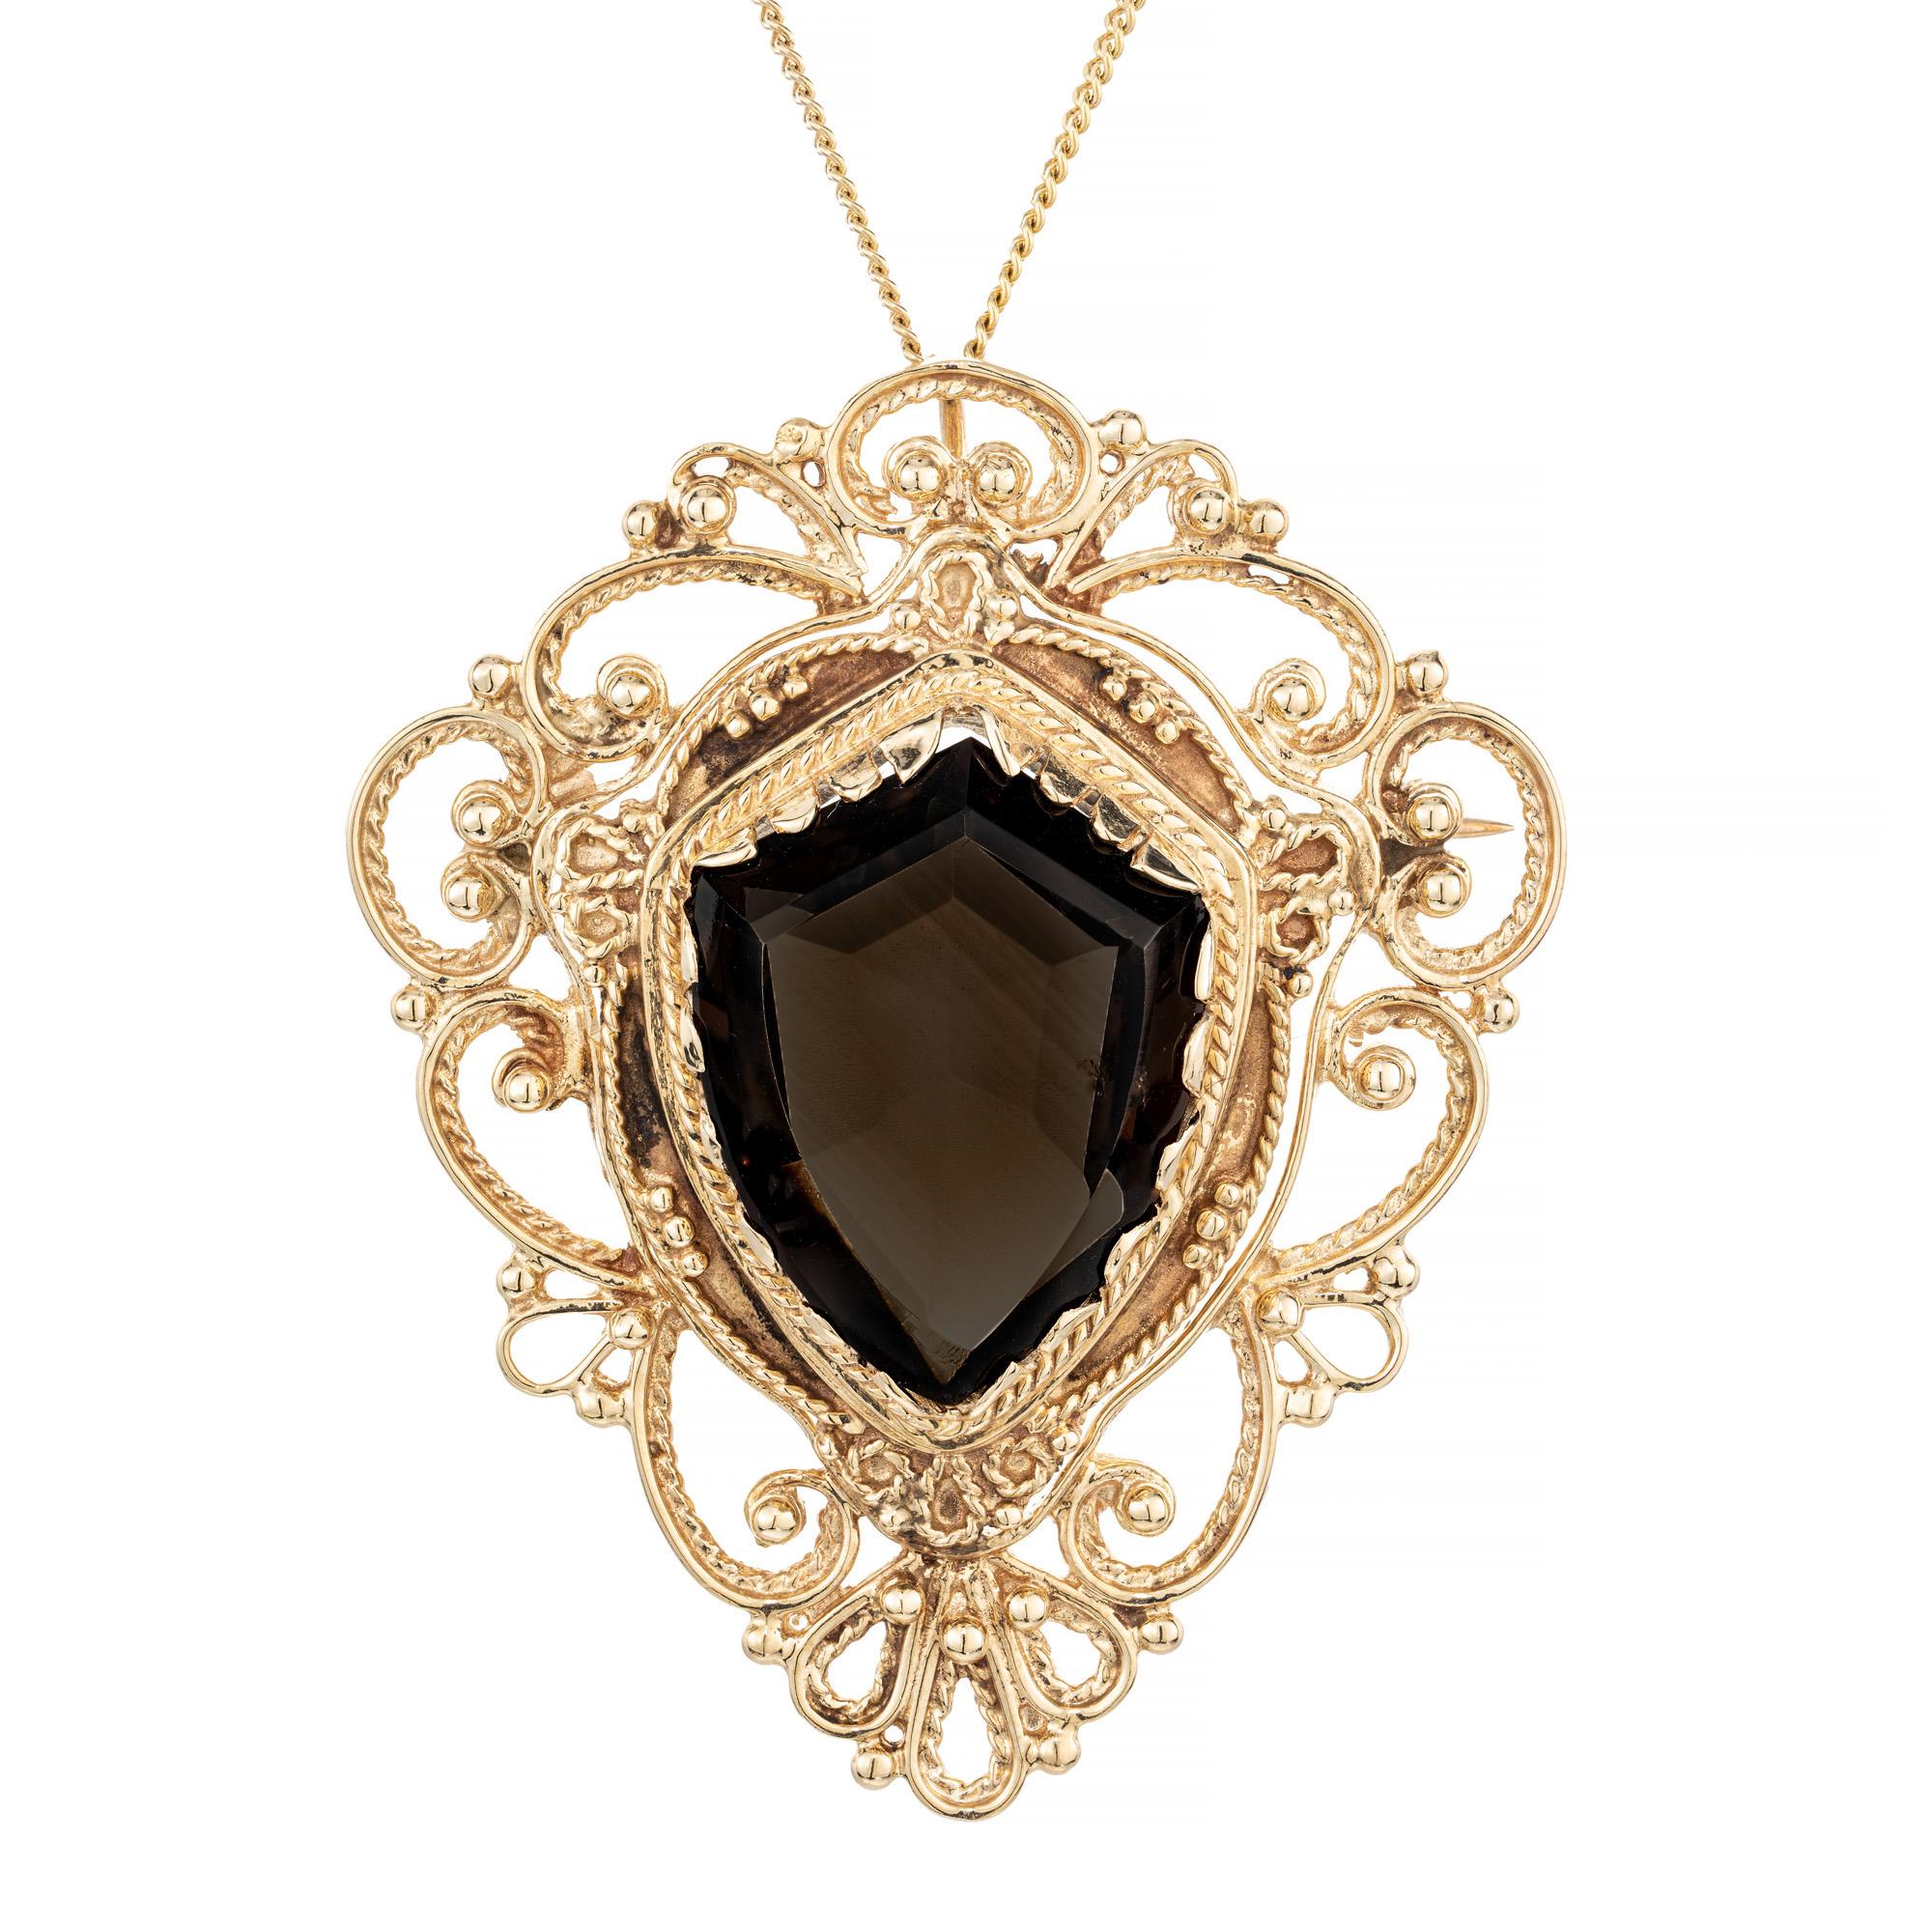 Vintage 1950's smoky quartz yellow gold brooch pendant necklace. 10.00ct shield shape smoky Quartz mounted in 14k yellow gold highly detailed Victorian style setting. This unique gem can be worn two ways. separately as a brooch or as a pendant with